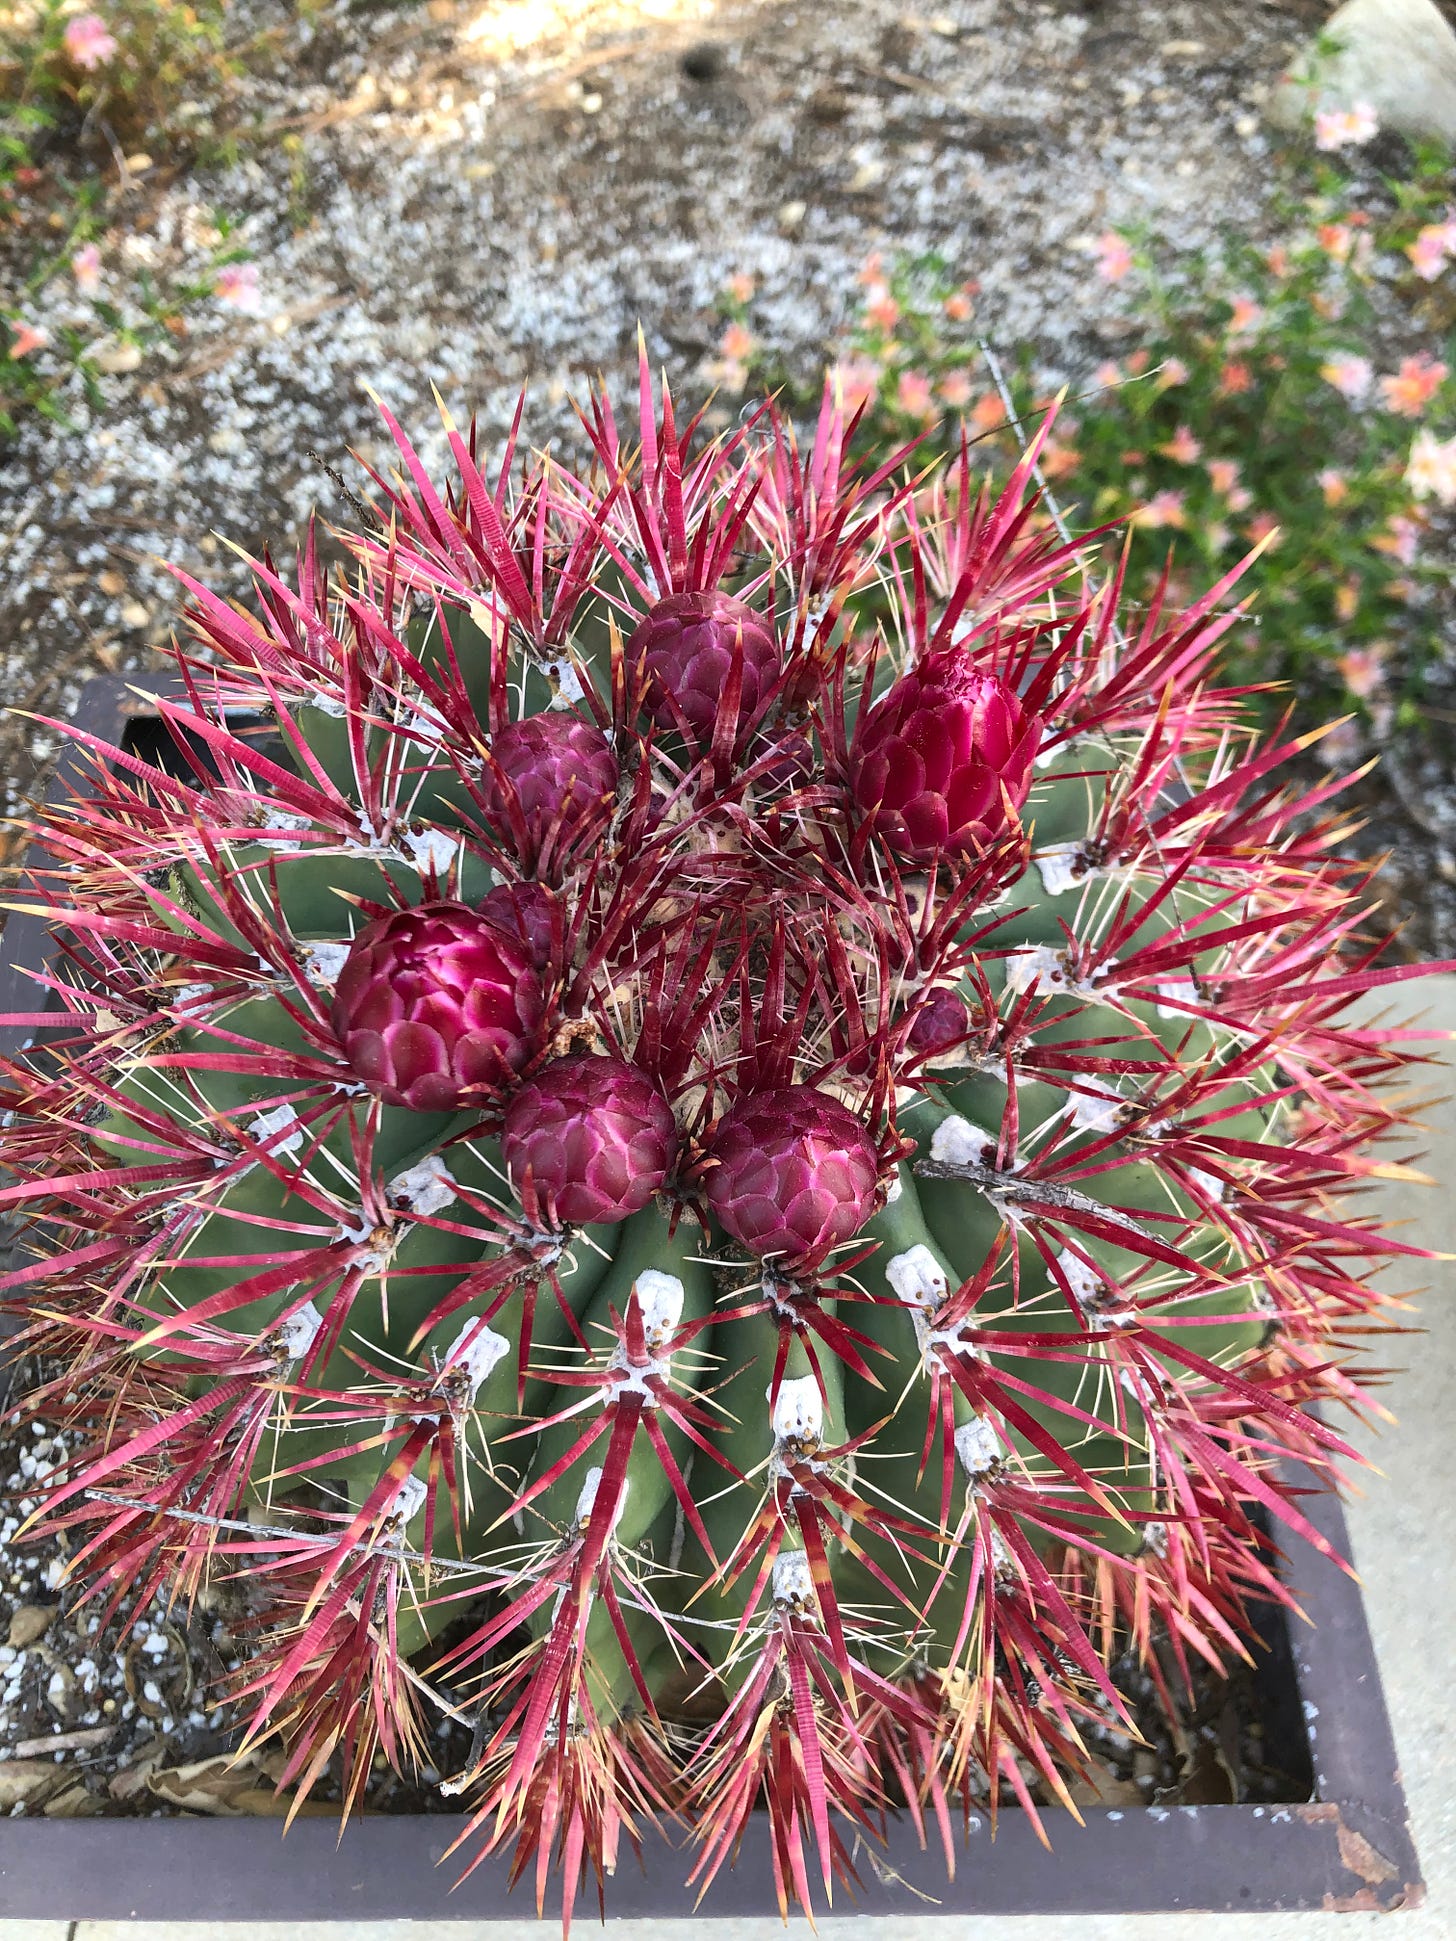 A barrel cactus with red spikes in bloom with six red buds at the top.